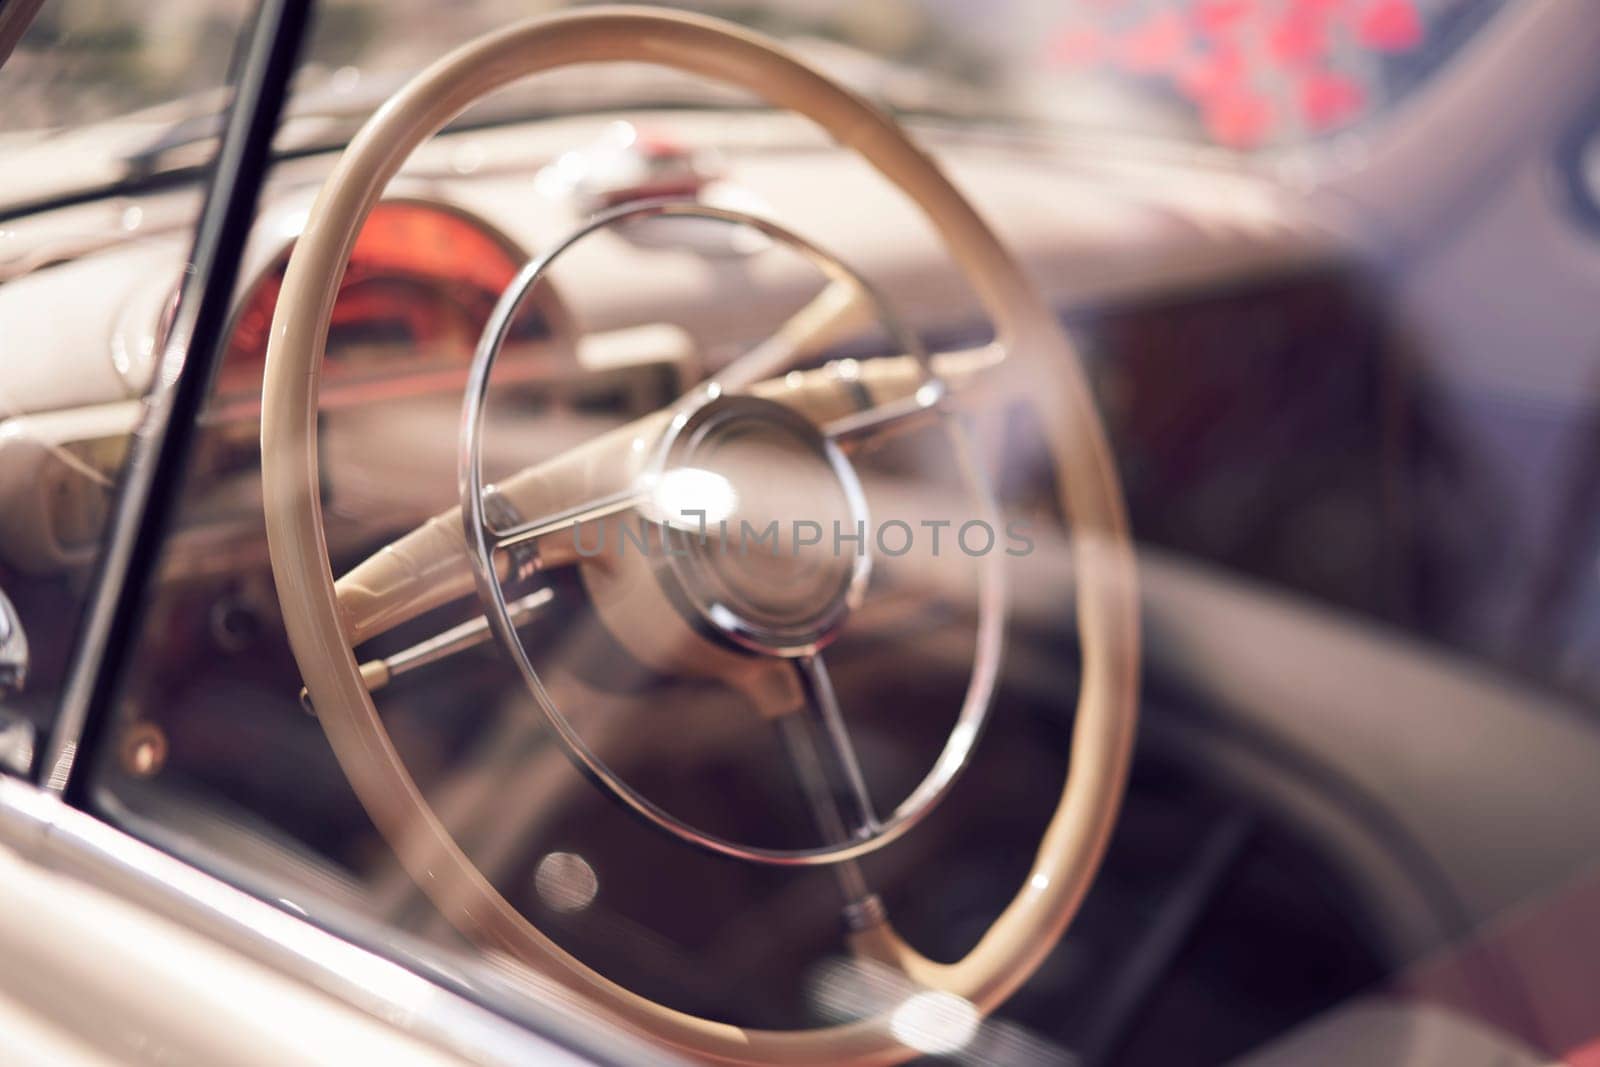 A vintage cars steering wheel and classic dashboard can be seen through the car window in a closeup view